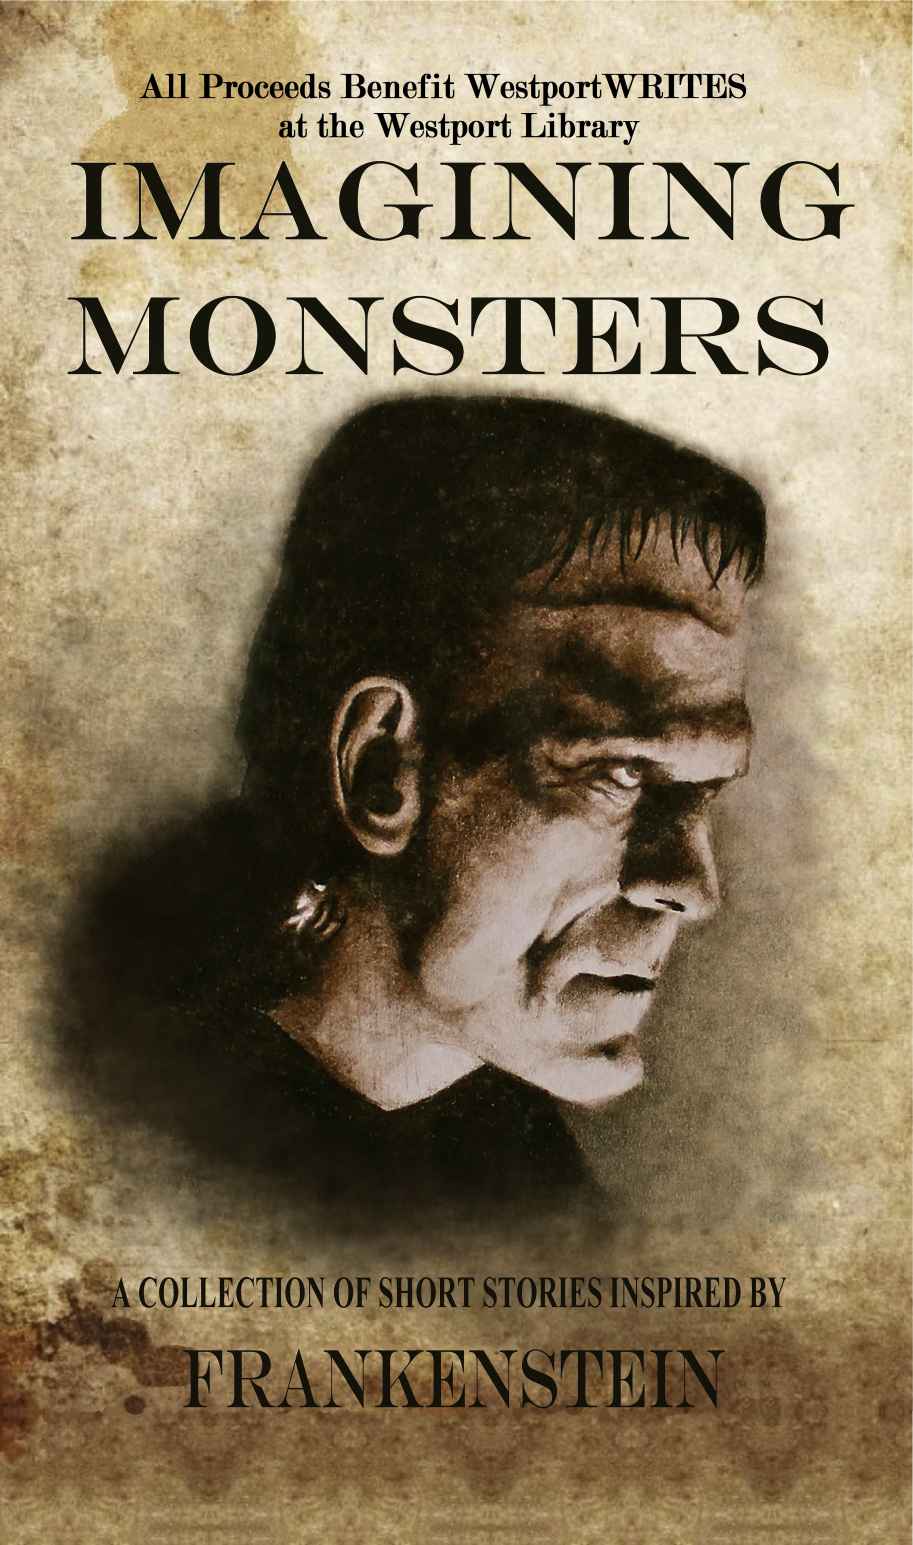 Imagining Monsters: A Collection of Short Stories Inspired by Frankenstein